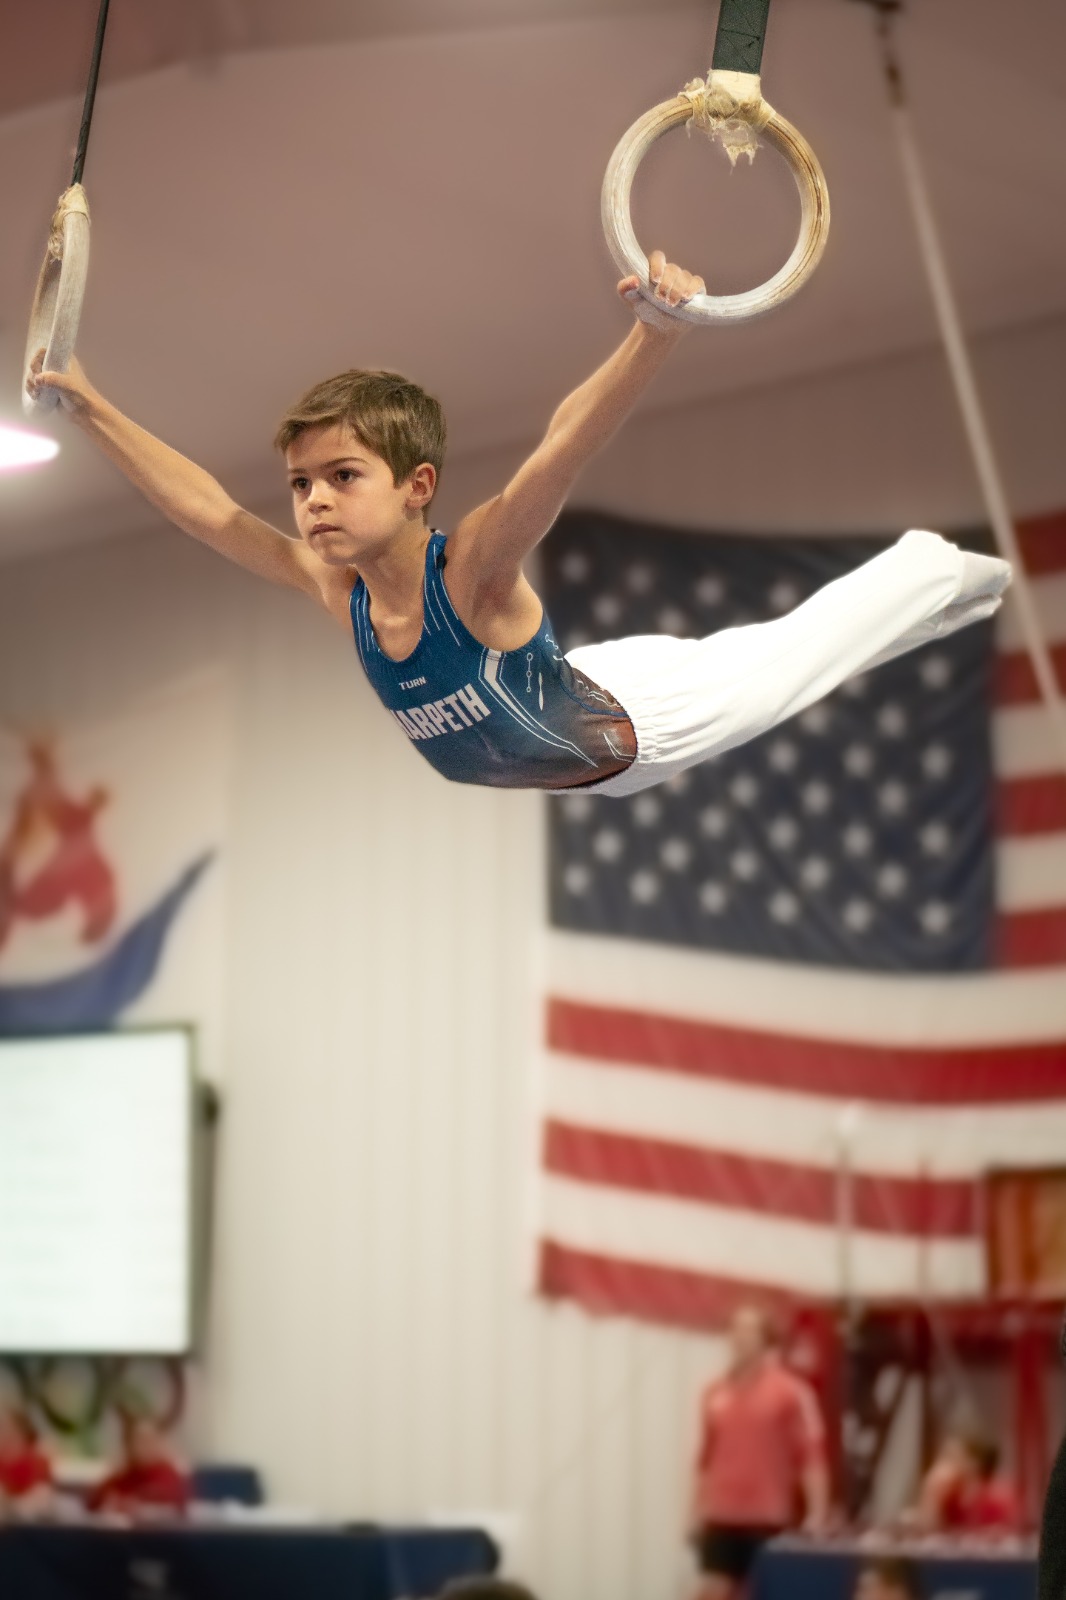 A boy on the Competitive Team is pictured in perfect form on the rings during a competition.